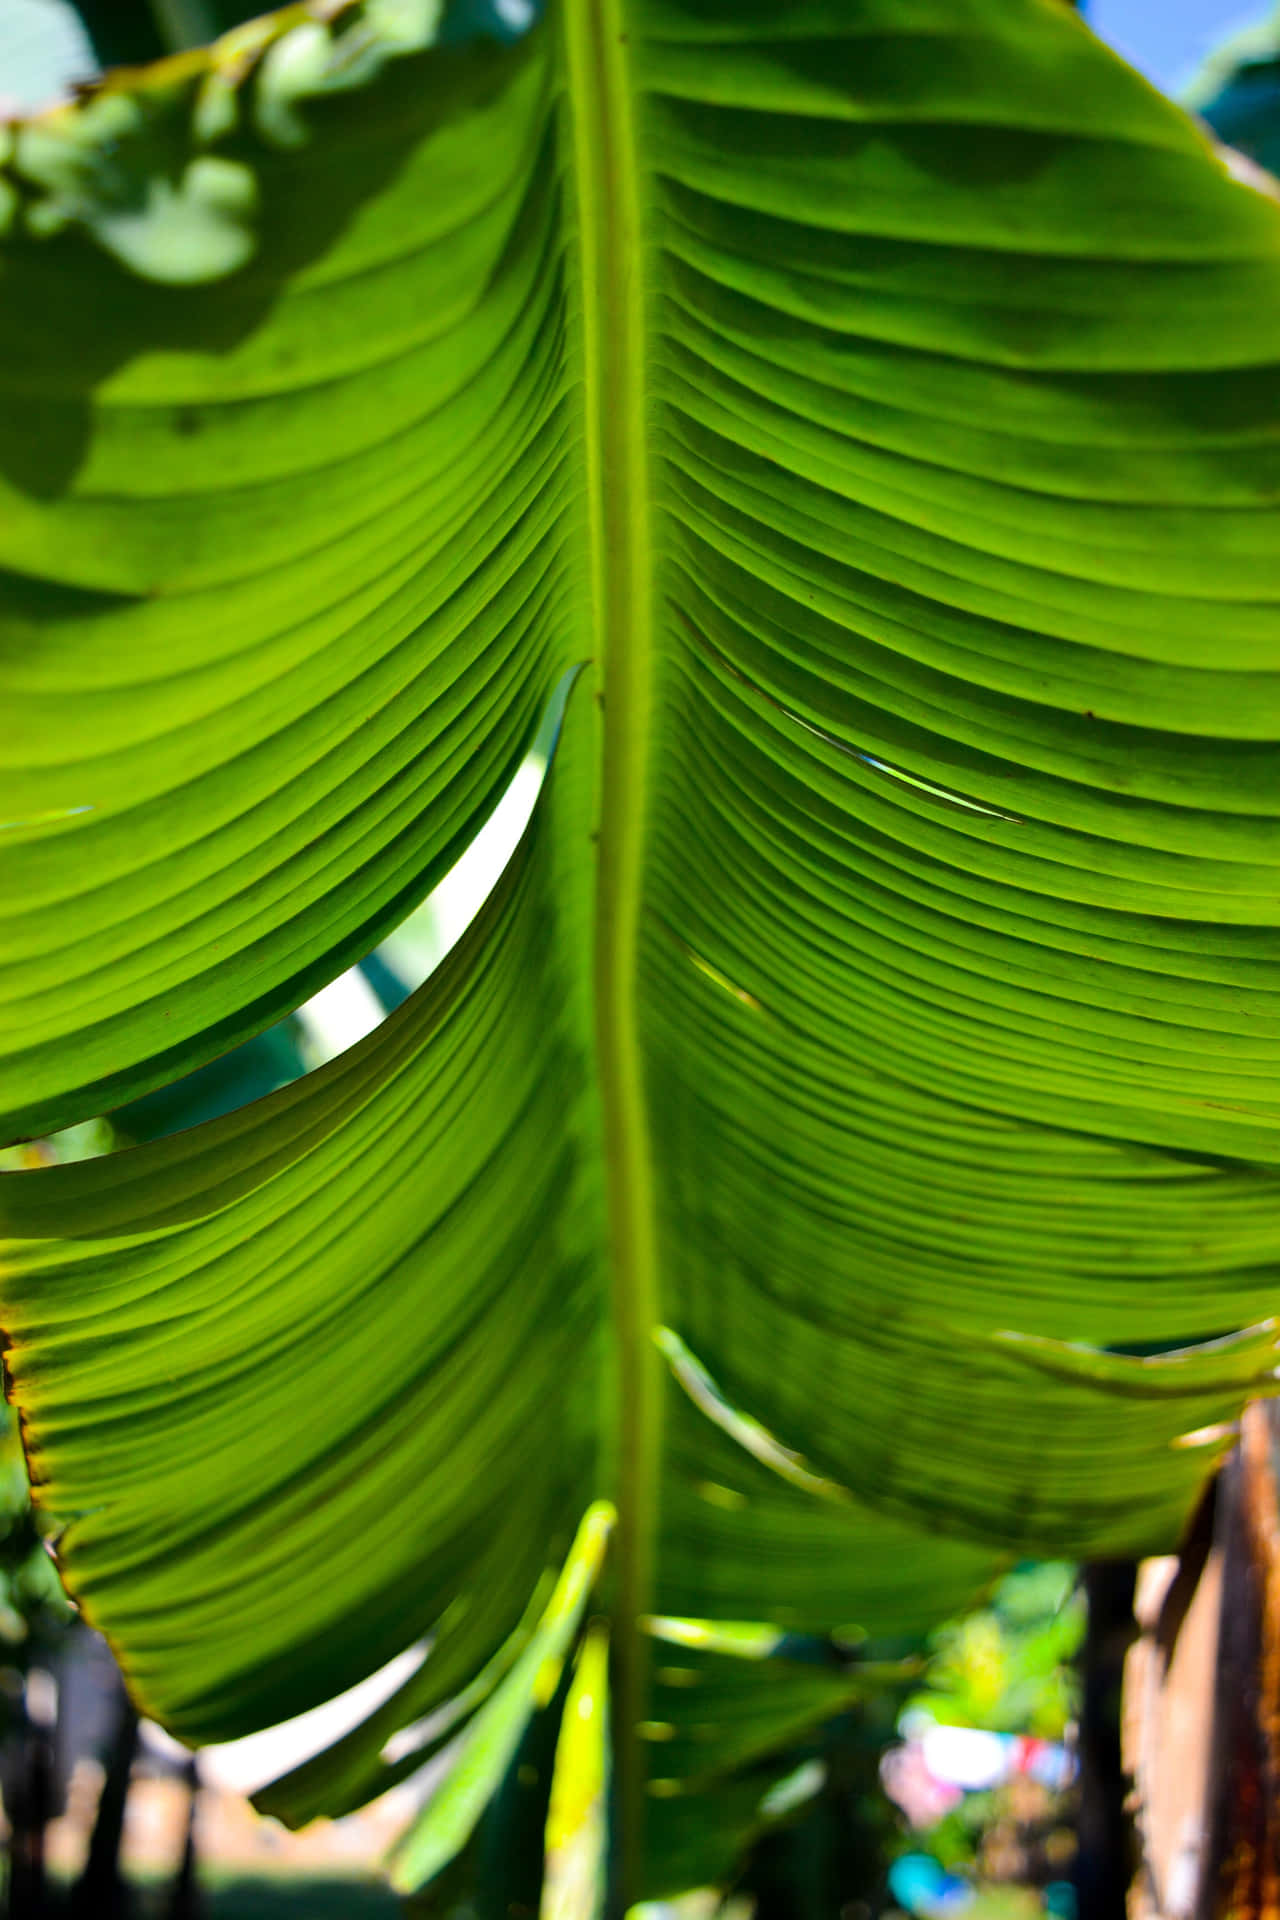 "A picturesque view of a banana leaf under a bright sky."